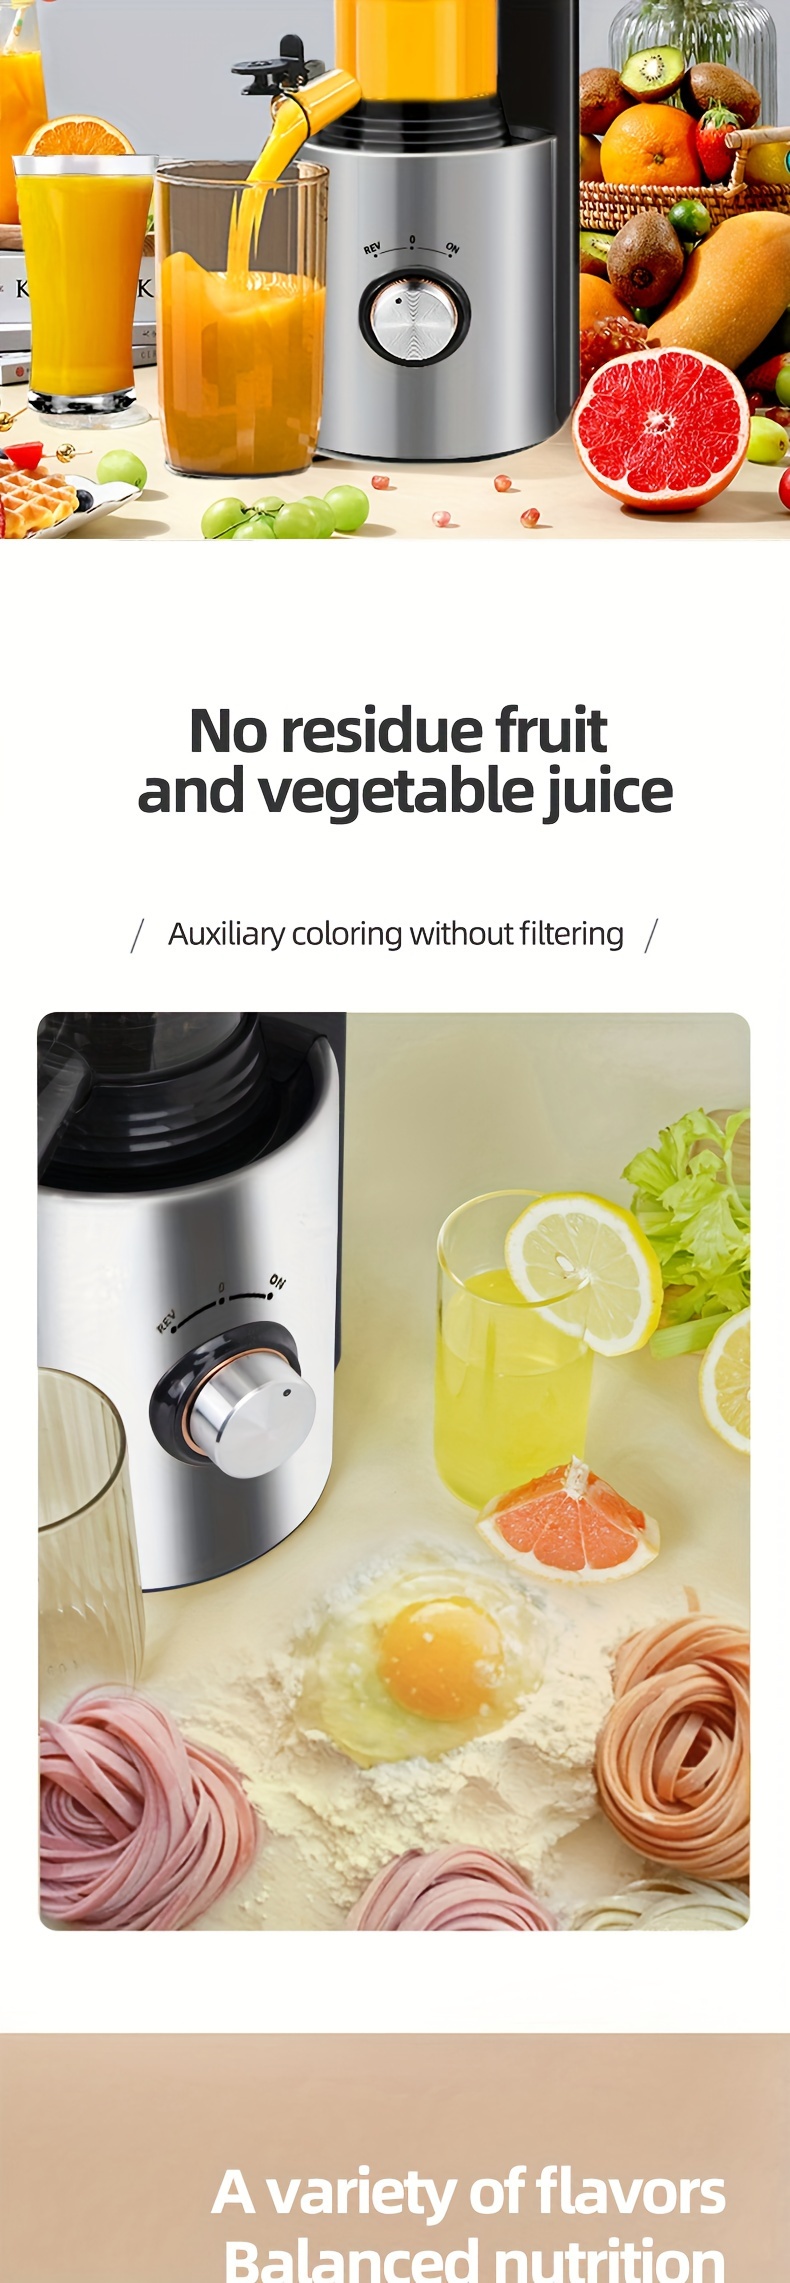 Buy juicer heavy duty commercial model g5 pg710 Online in Antigua and  Barbuda at Low Prices at desertcart